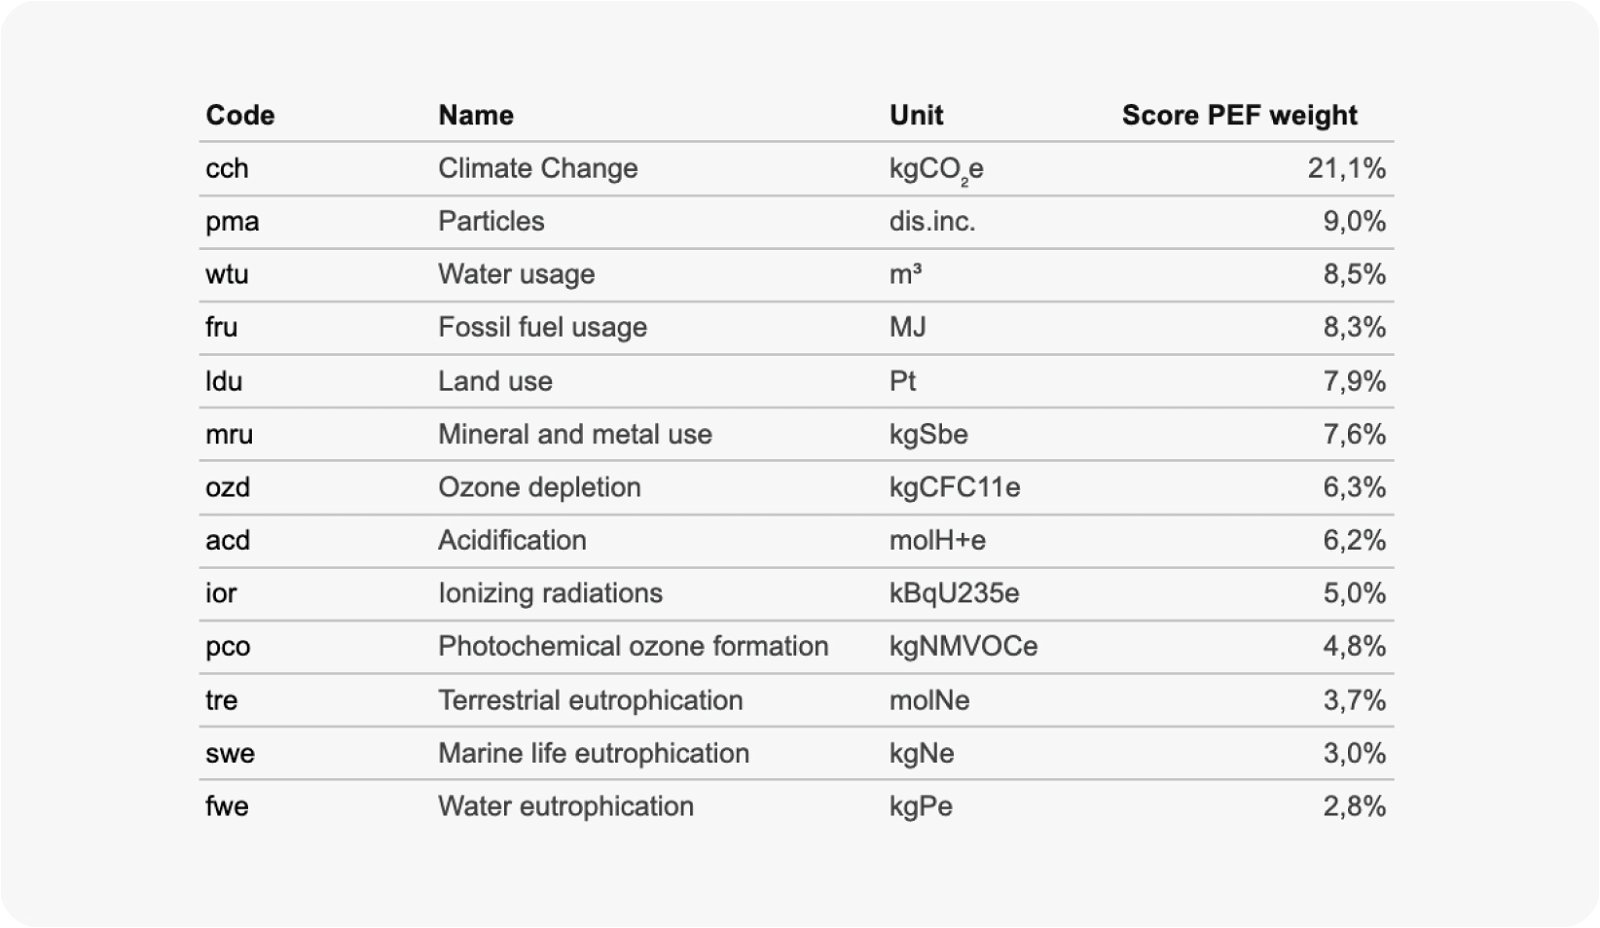 13 of the 16 environmental indicators from the PEFCR listed by Ecobalyse. See more details here. 